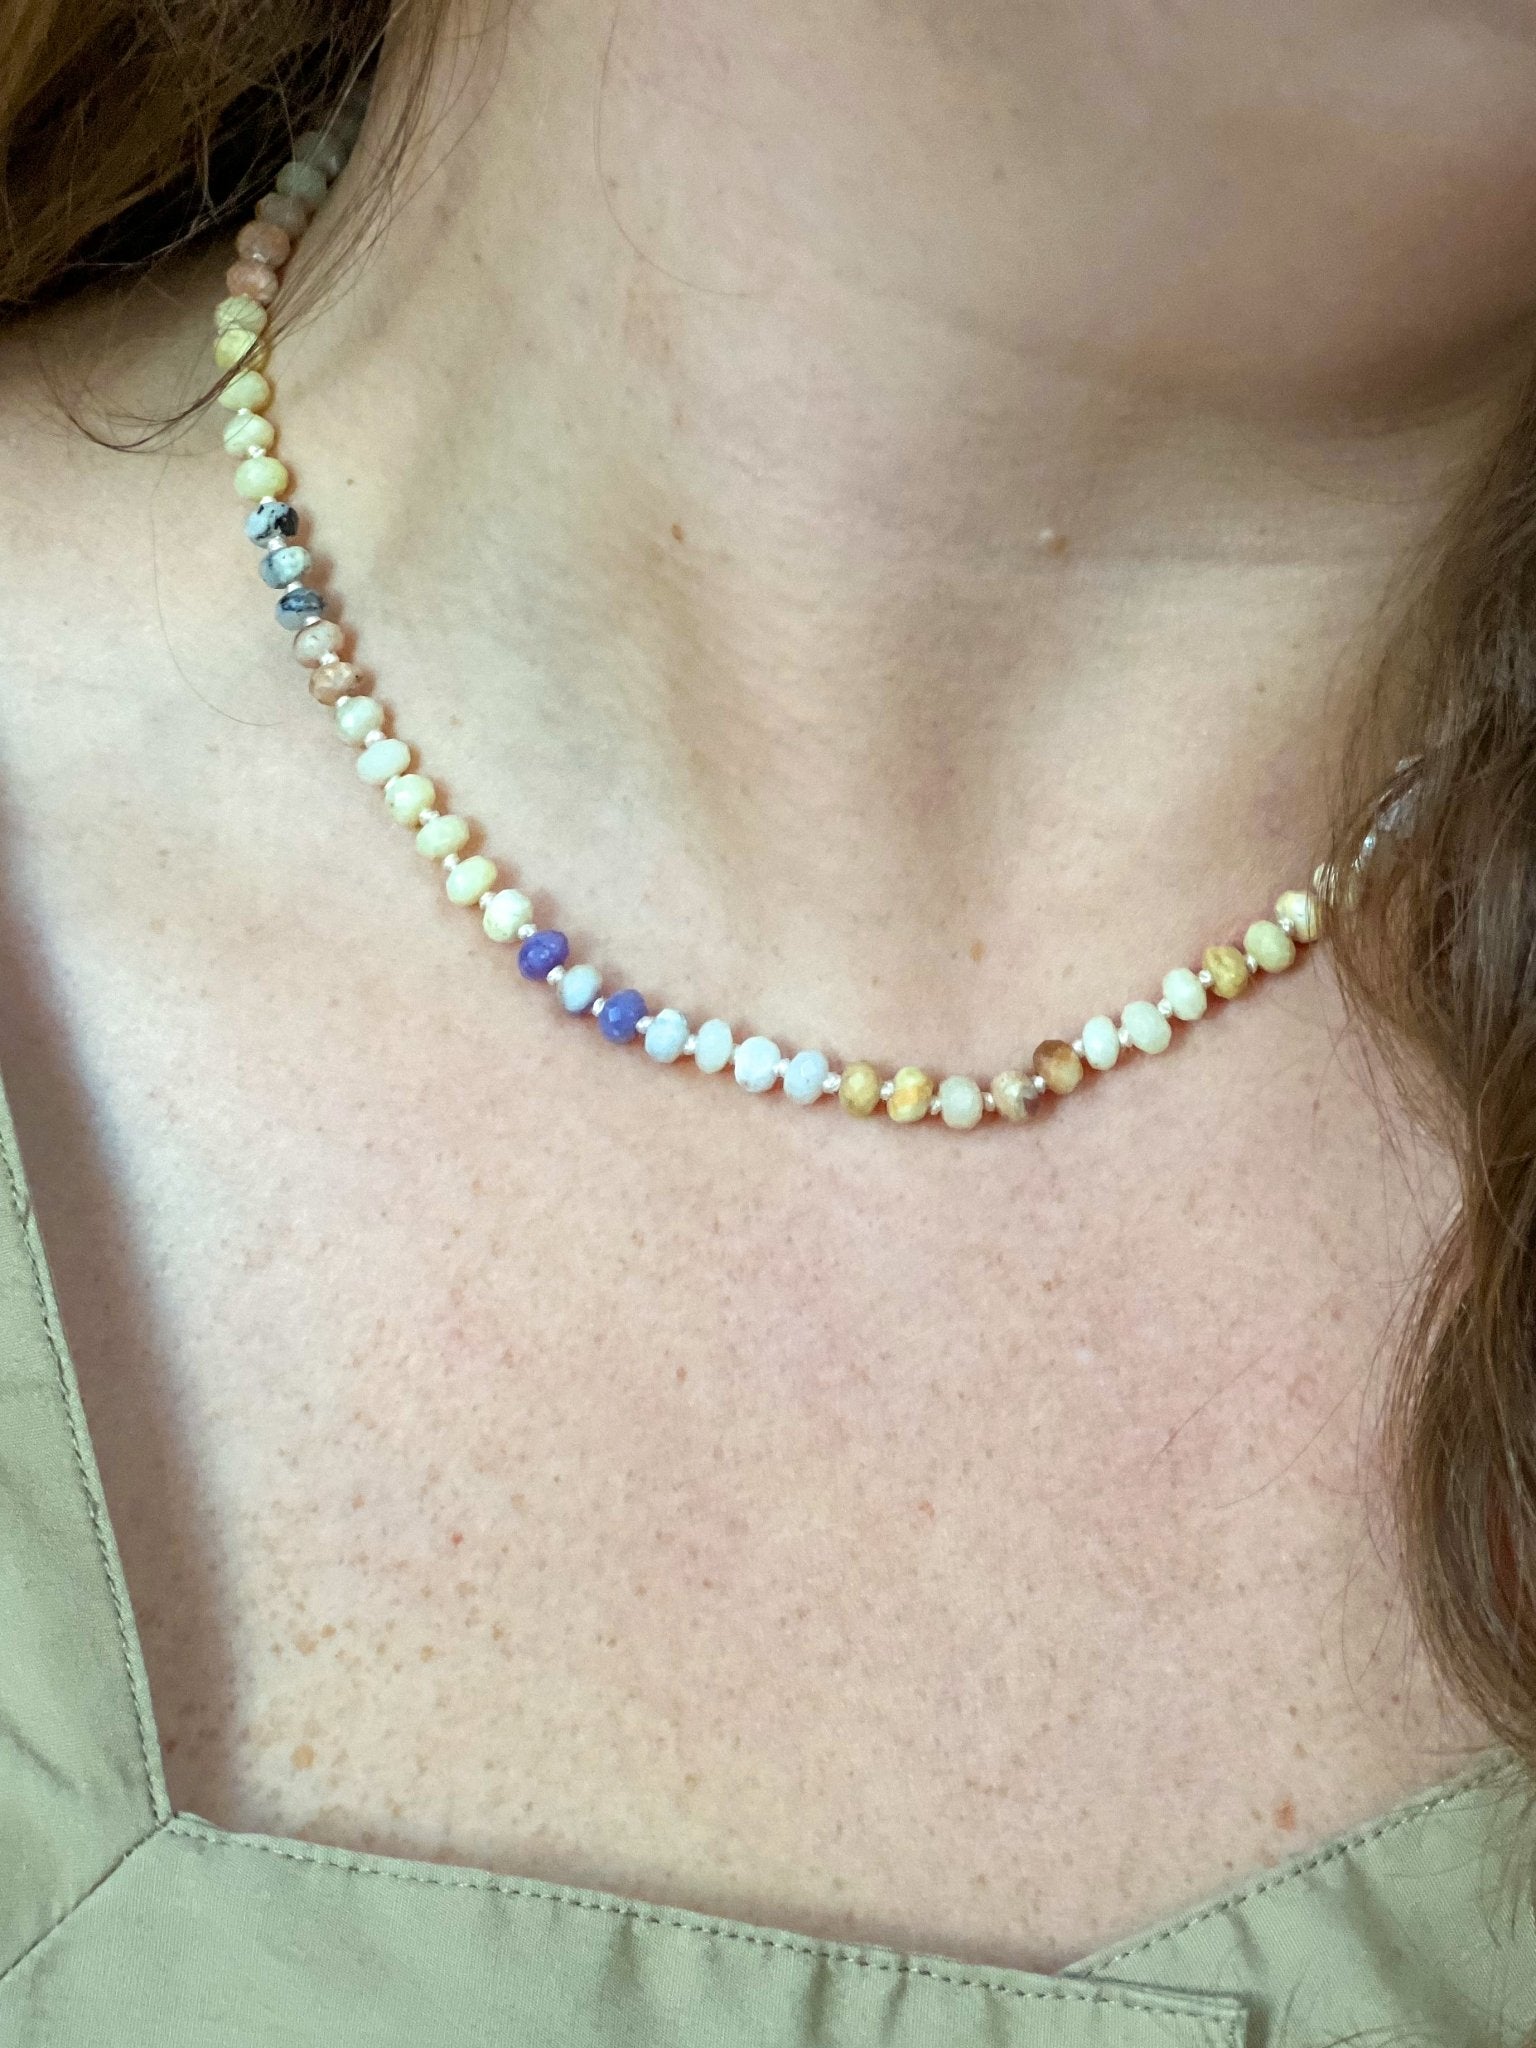 Rainbow Opal Candy Necklace - 18